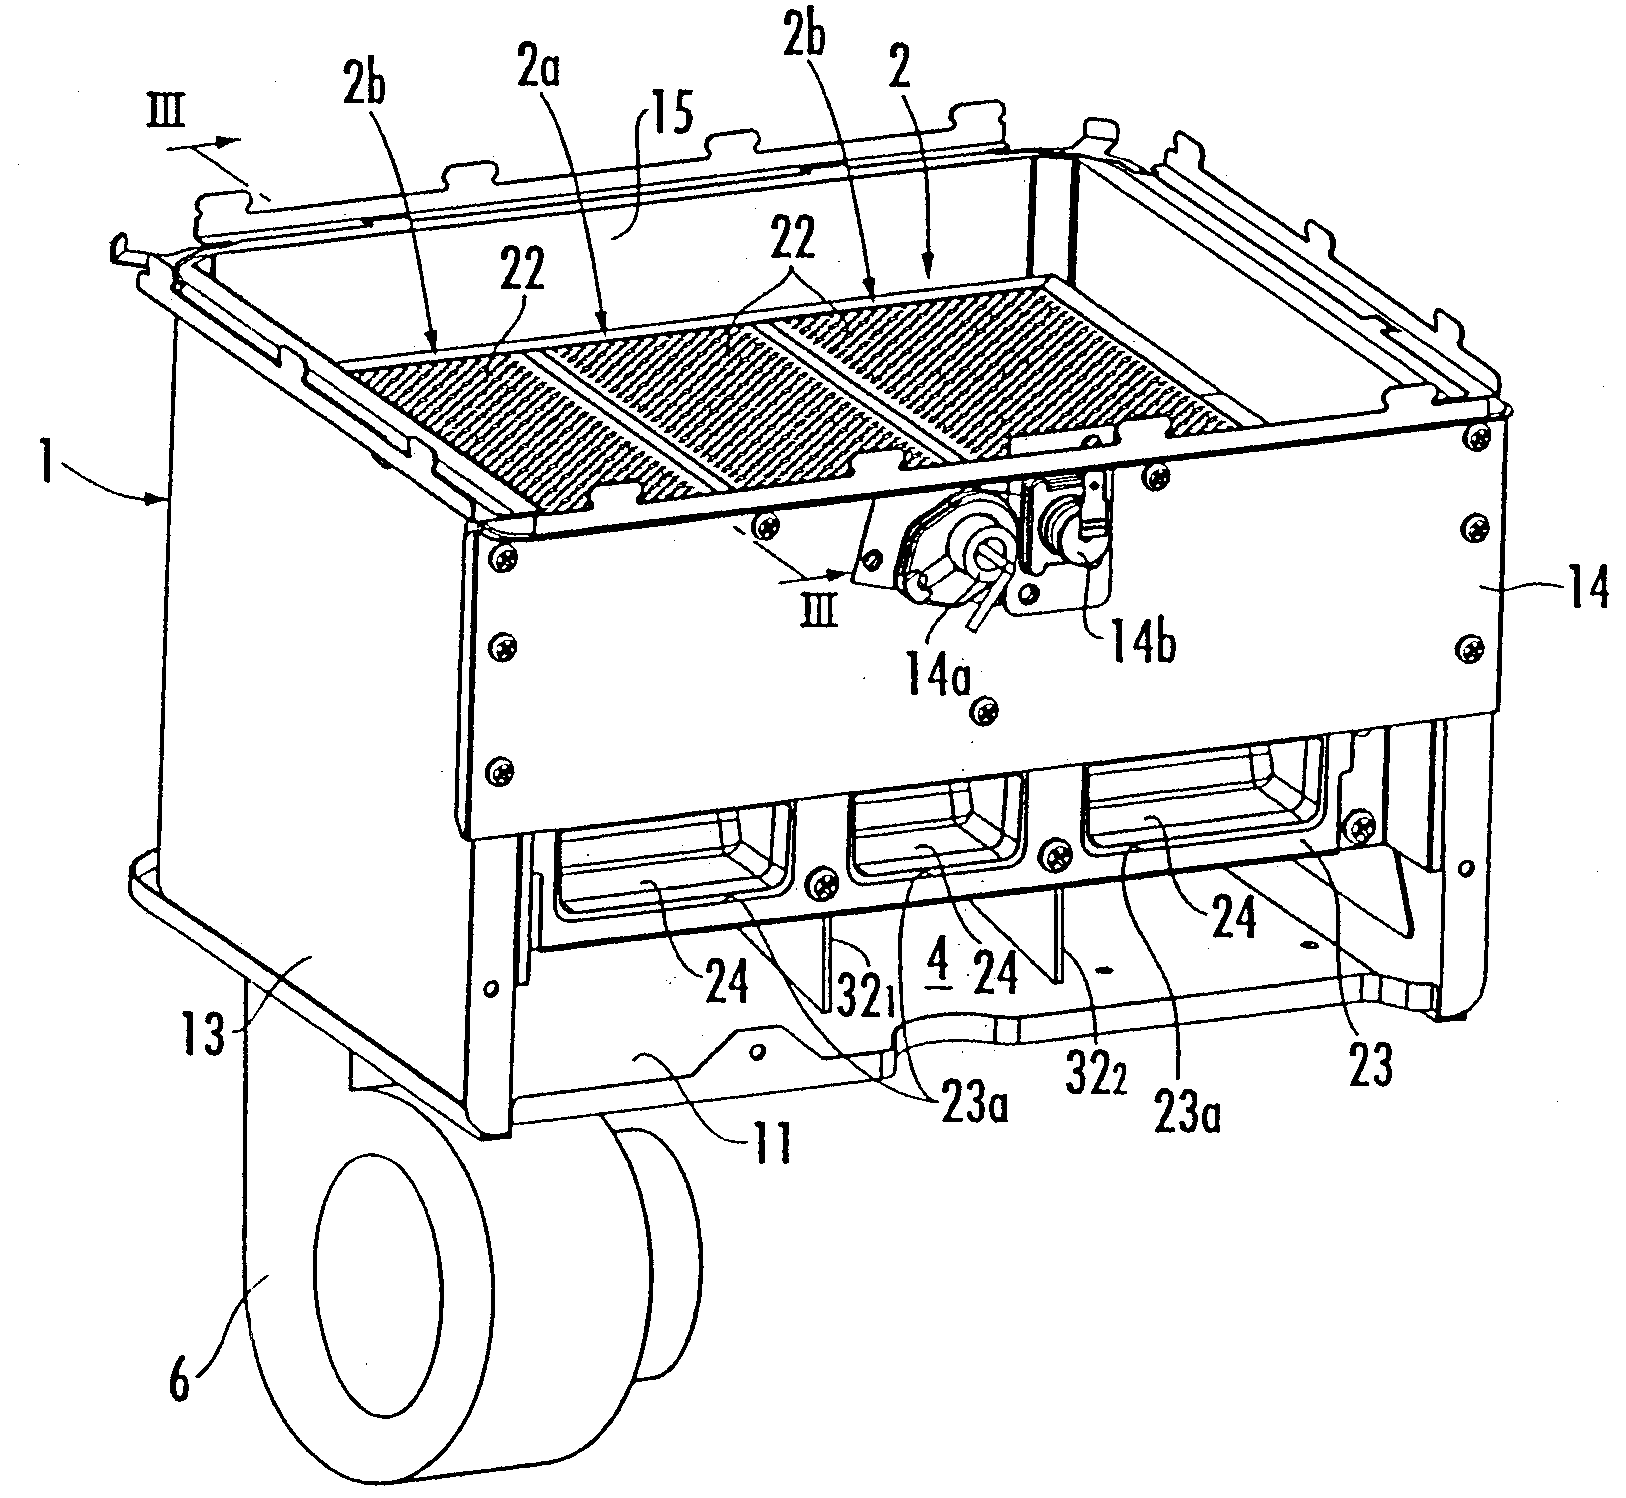 Forced air supply combustion apparatus